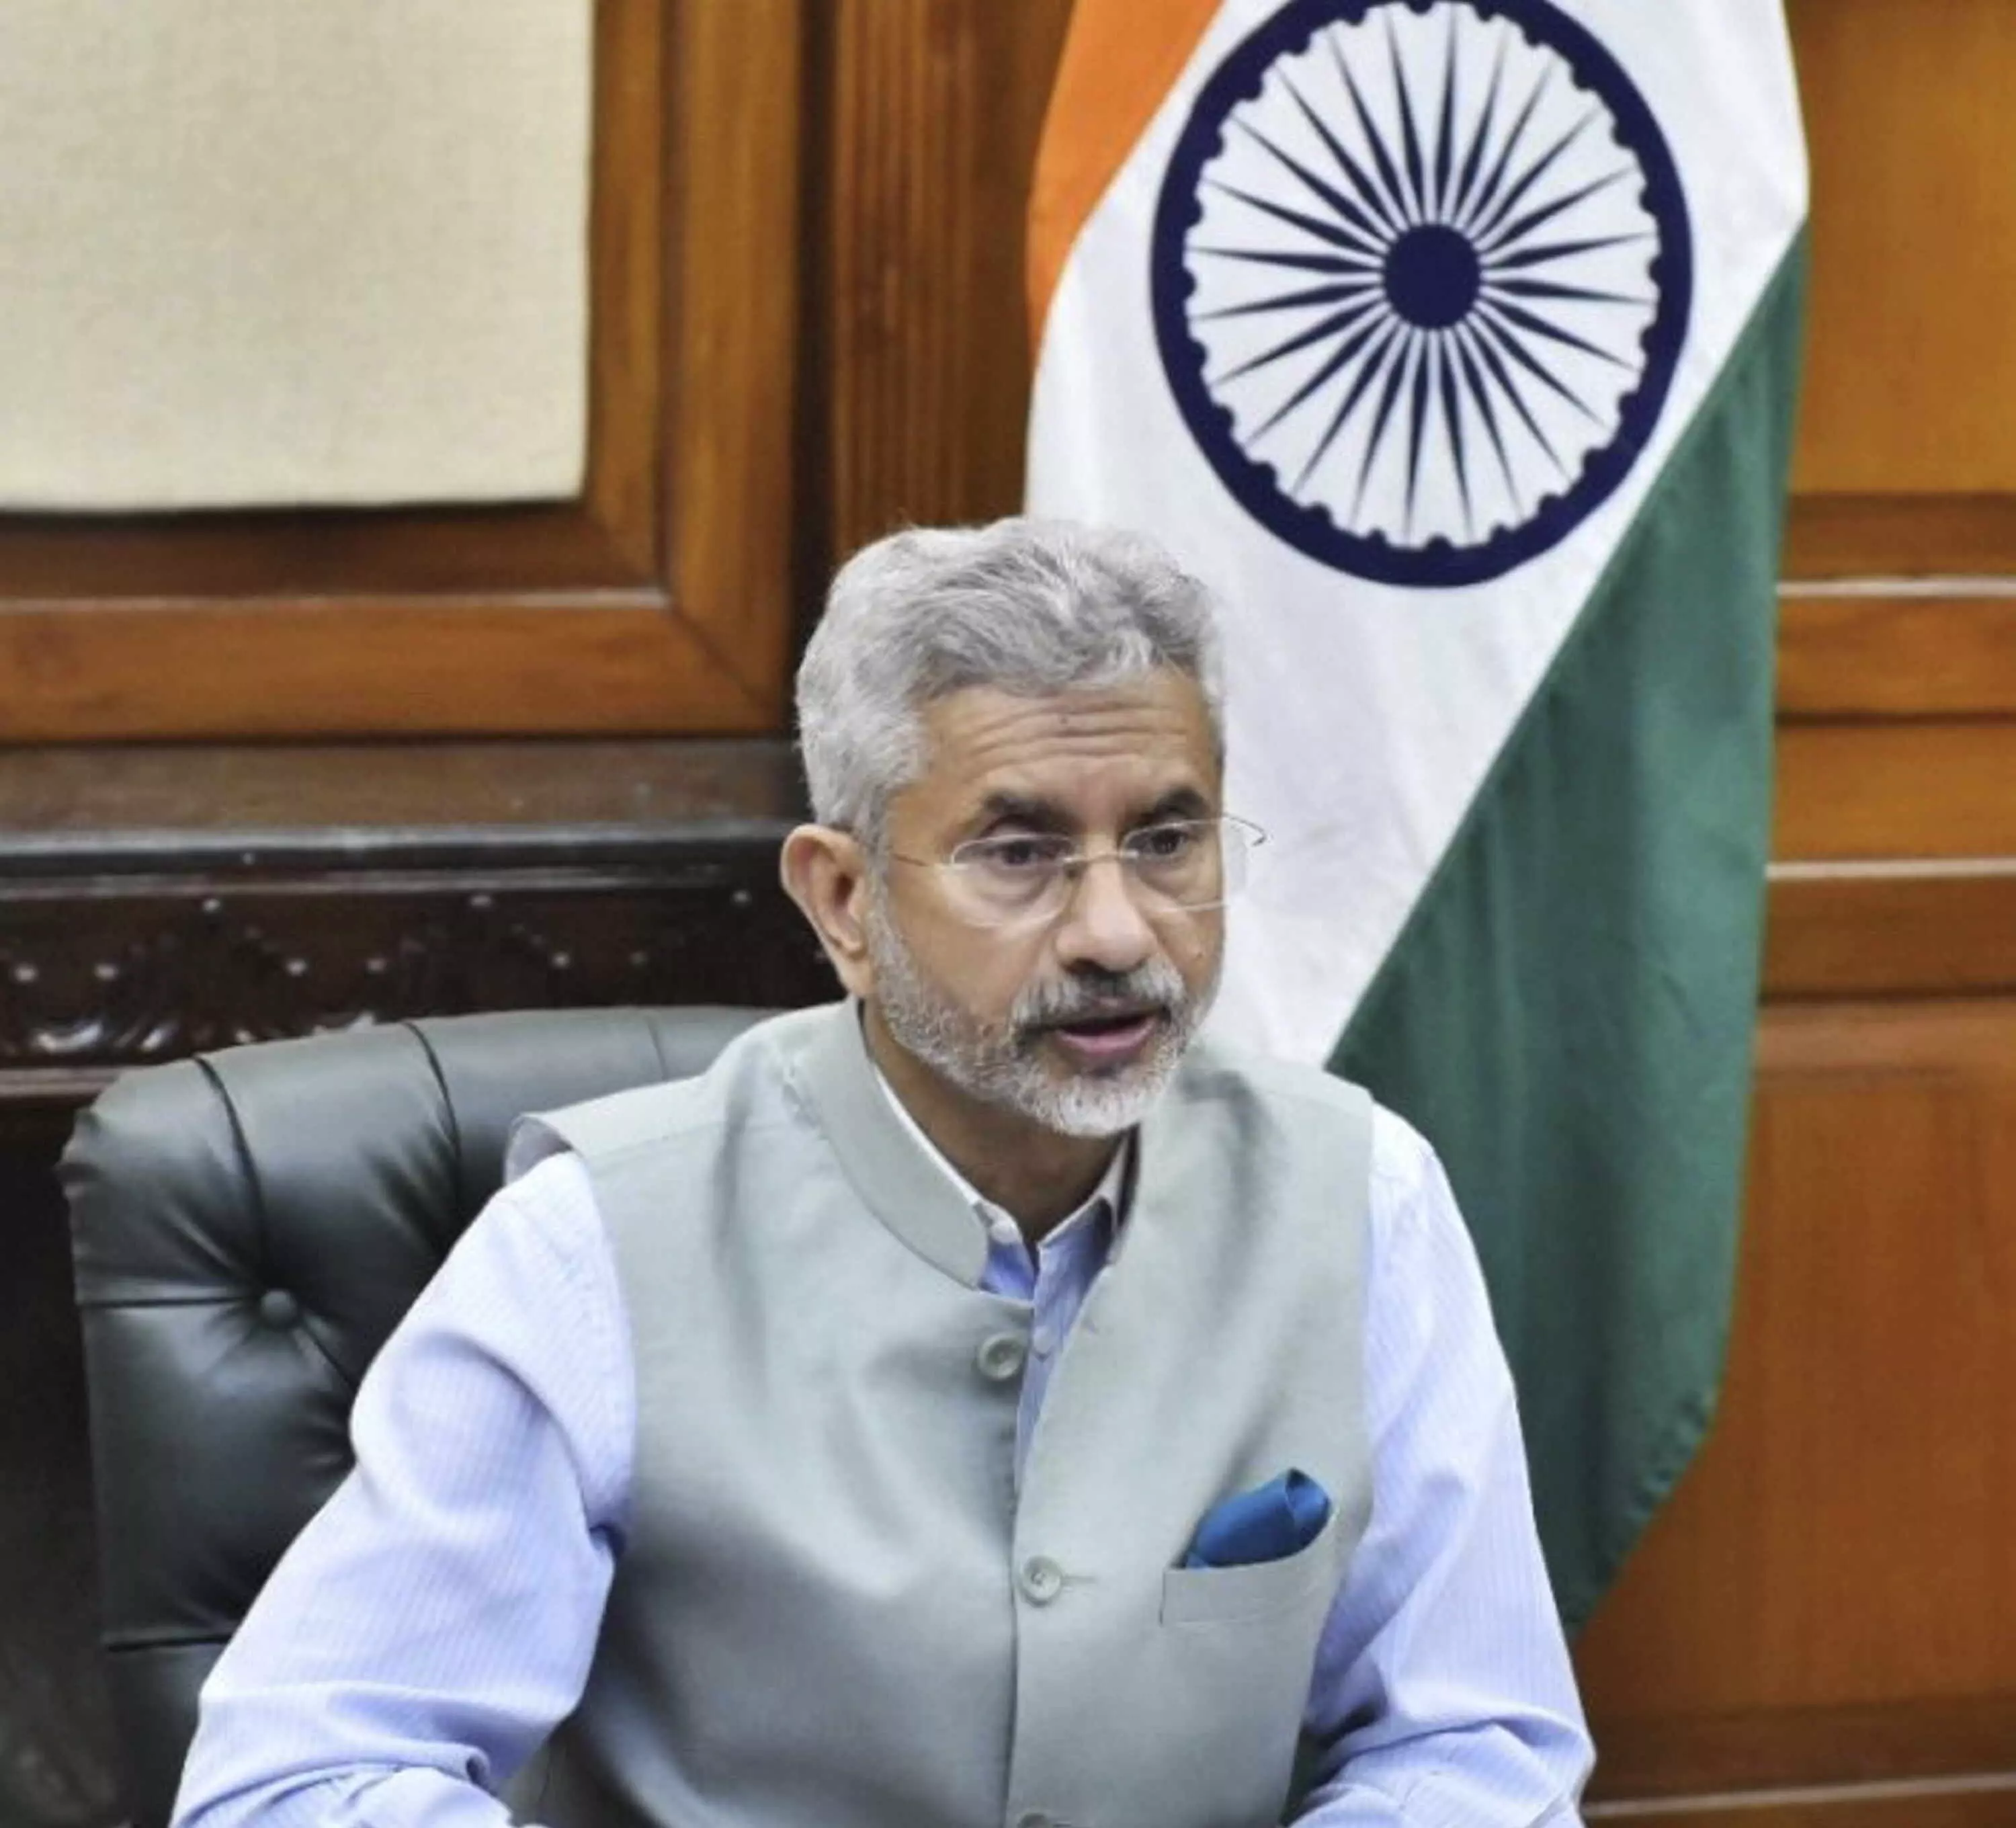 BHU will play key role in formation of India as significant power: S Jaishankar